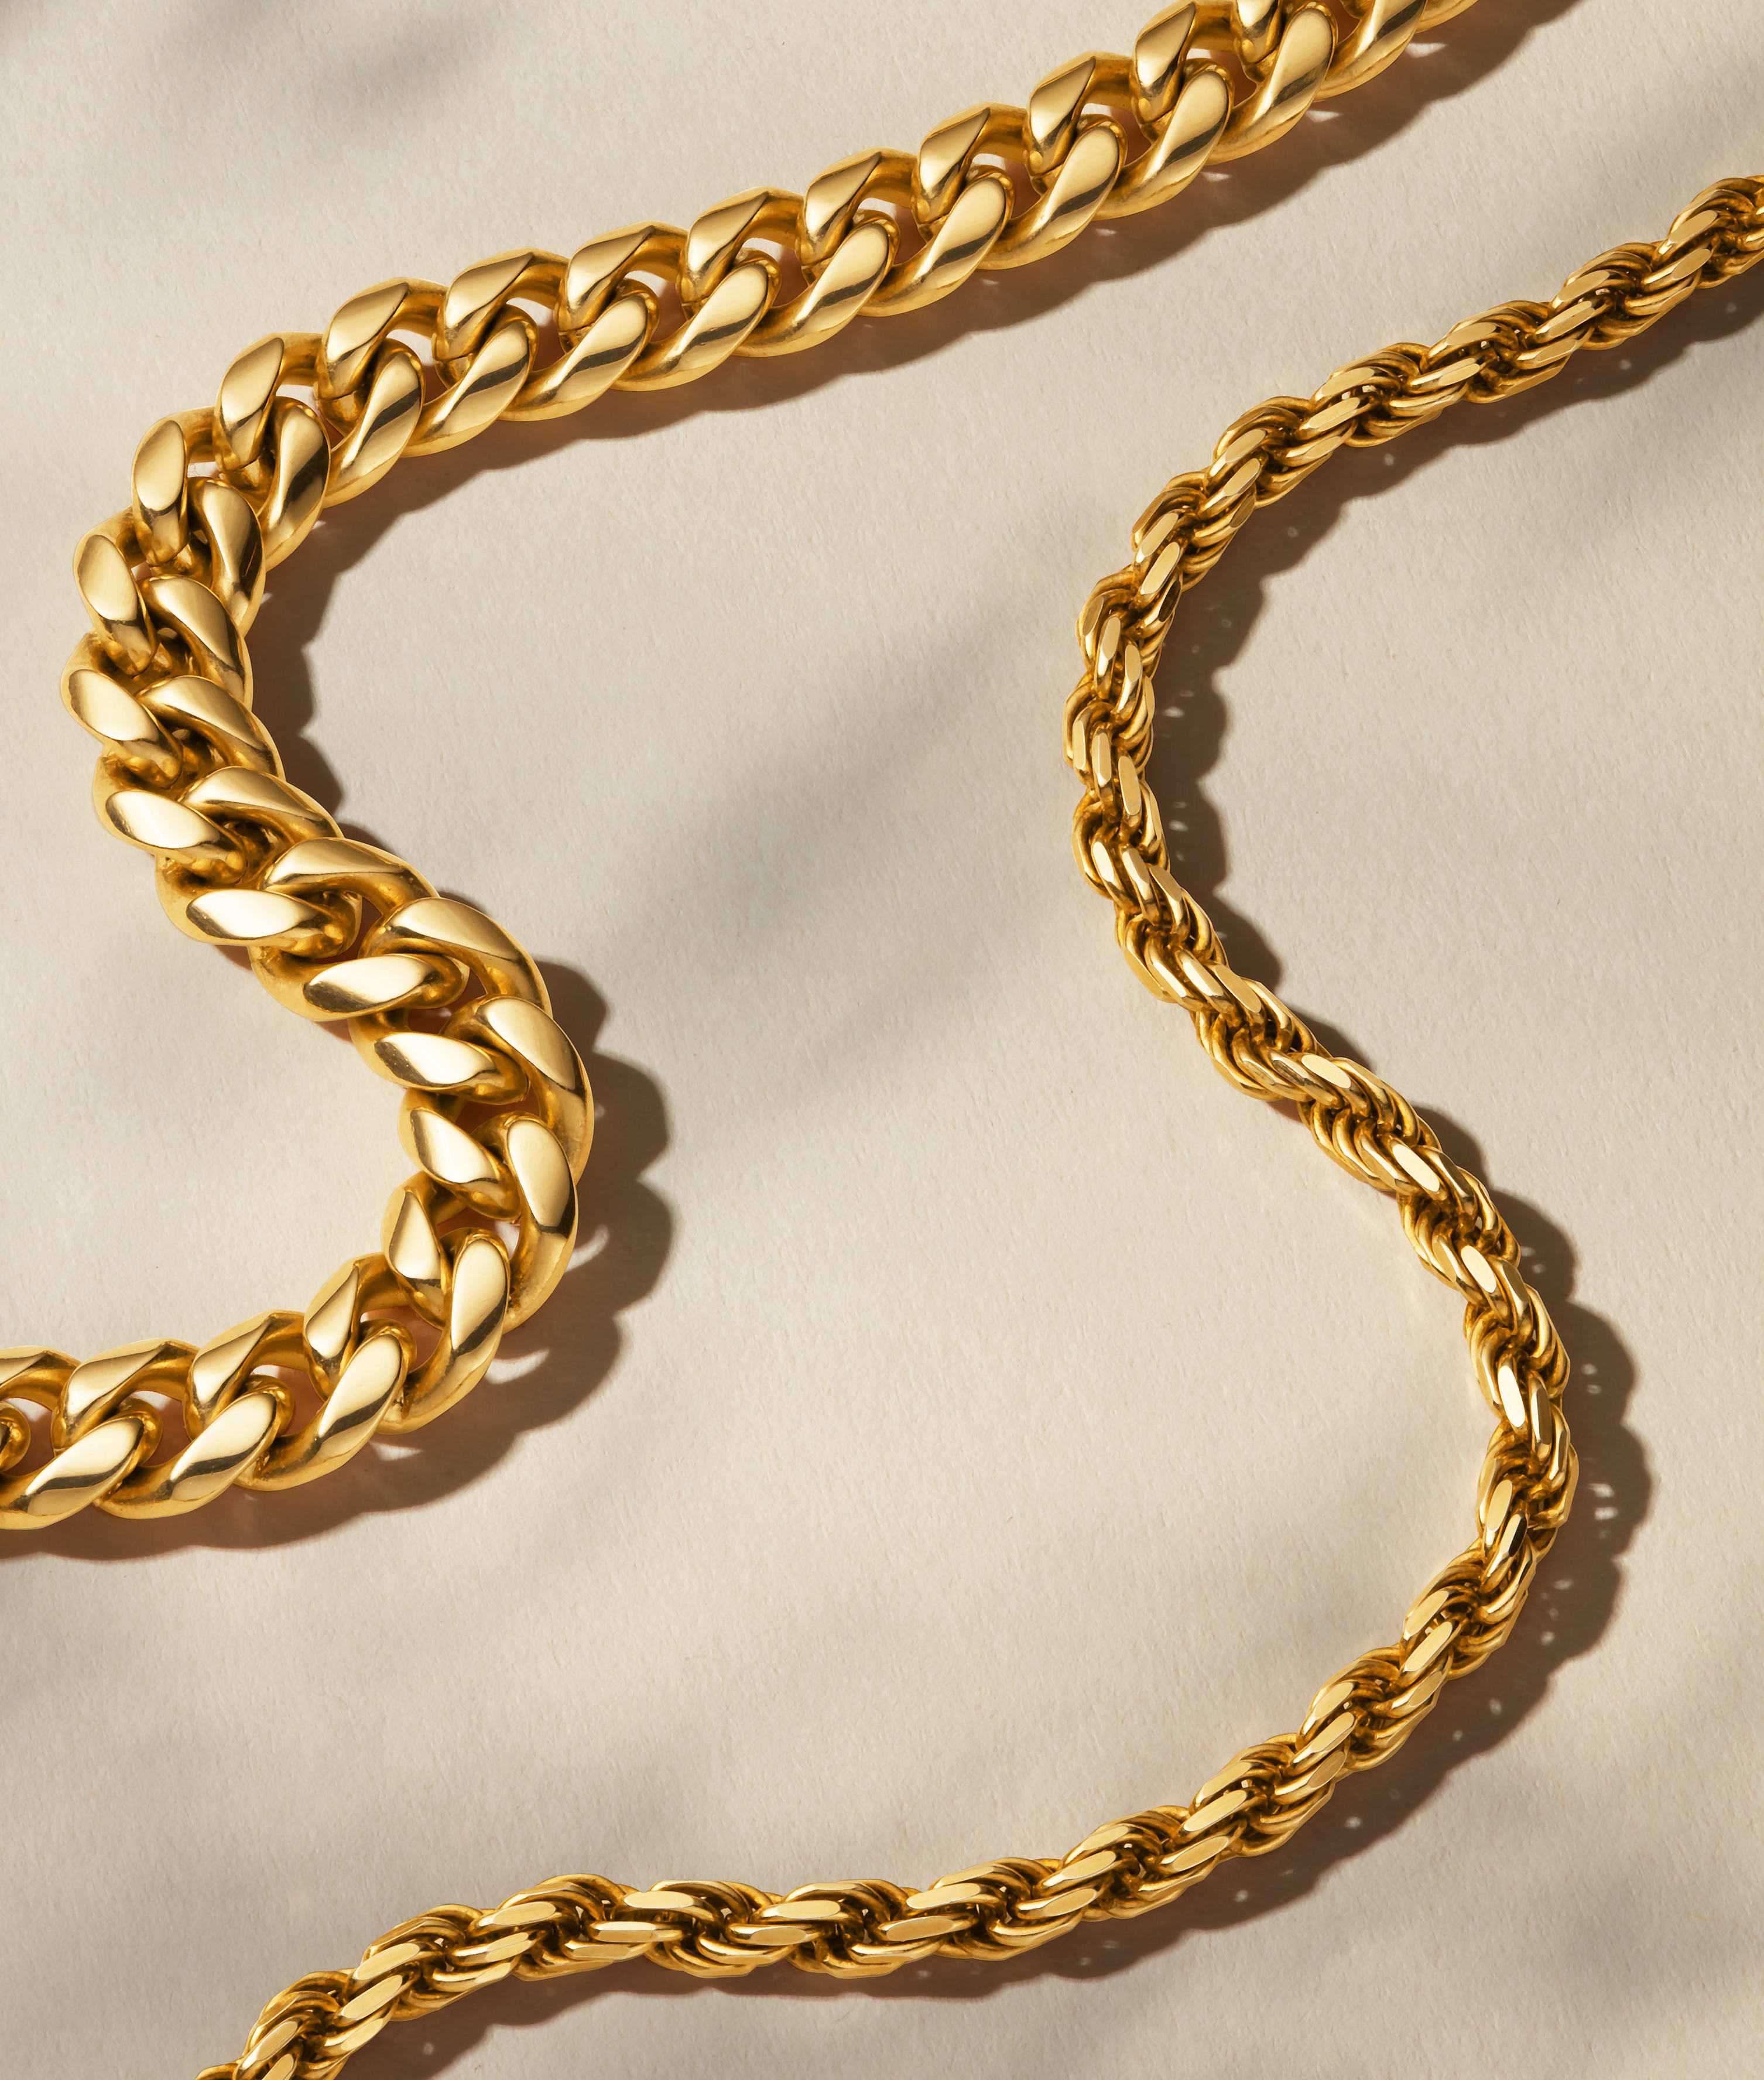 Image Cuban + Rope Chain/Bracelet Stack - Gold - Crafted in Italy